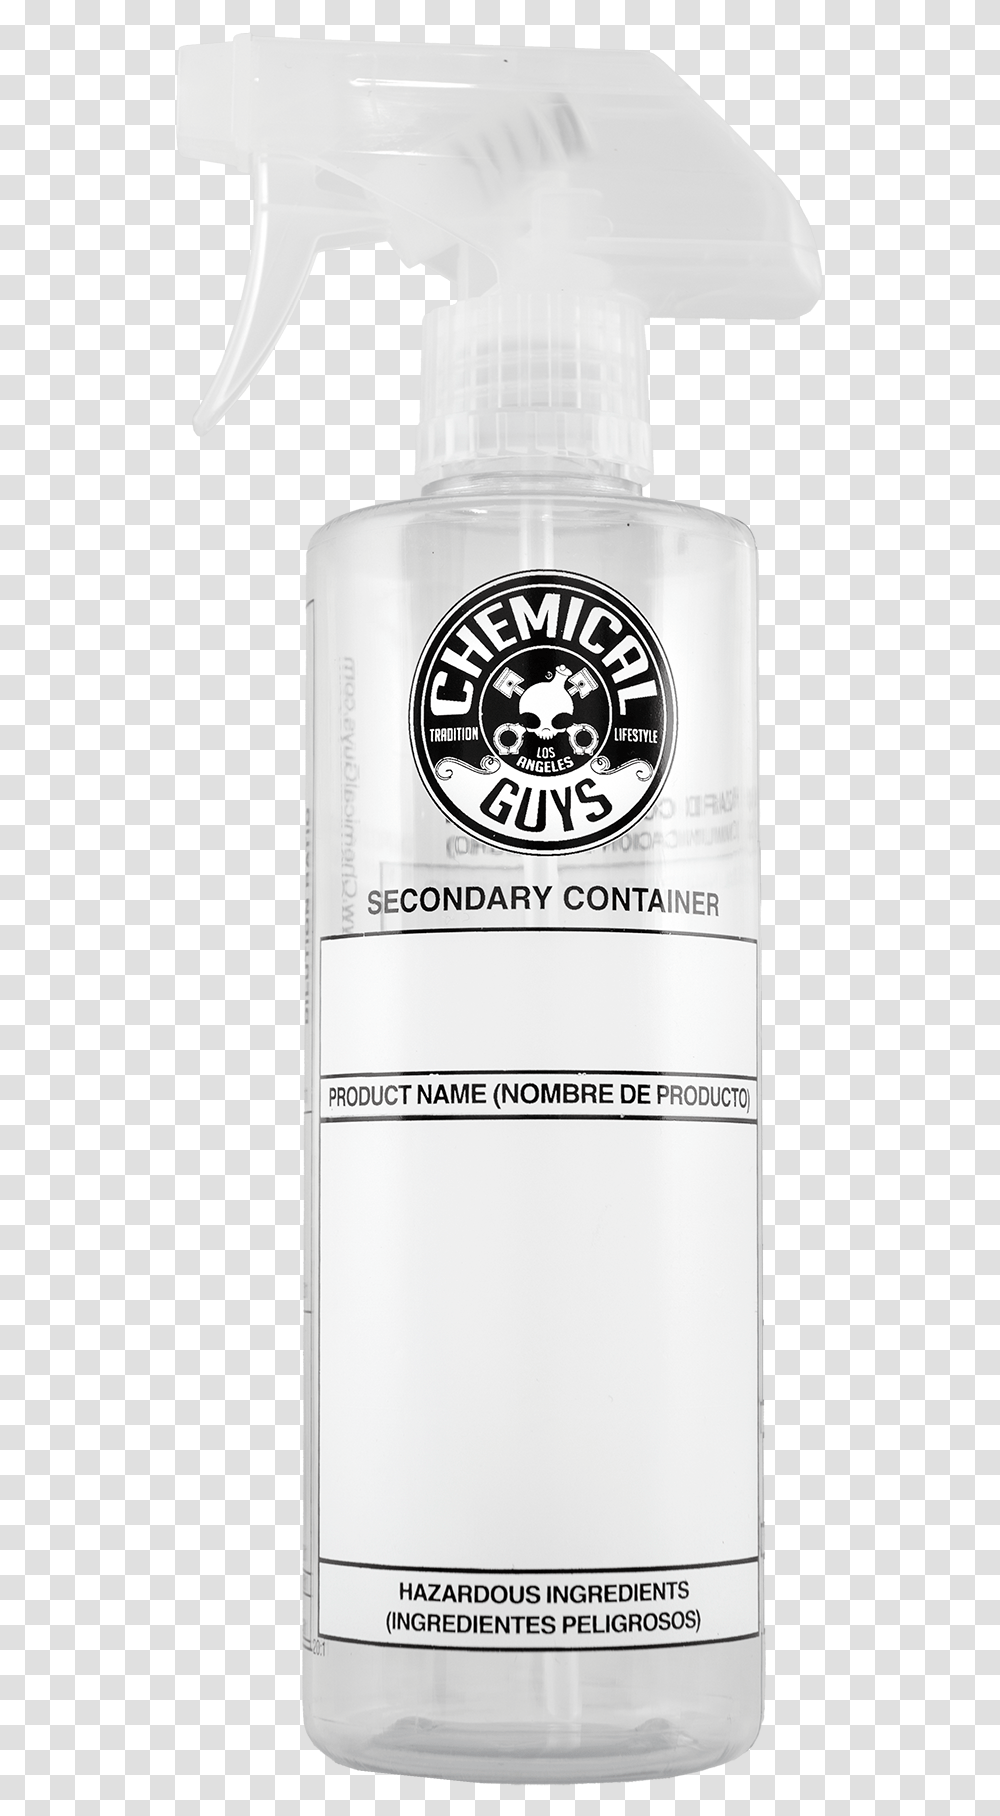 Secondary Container Dilution Bottle Chemical Guys, Shaker, Tin, Cosmetics, Can Transparent Png